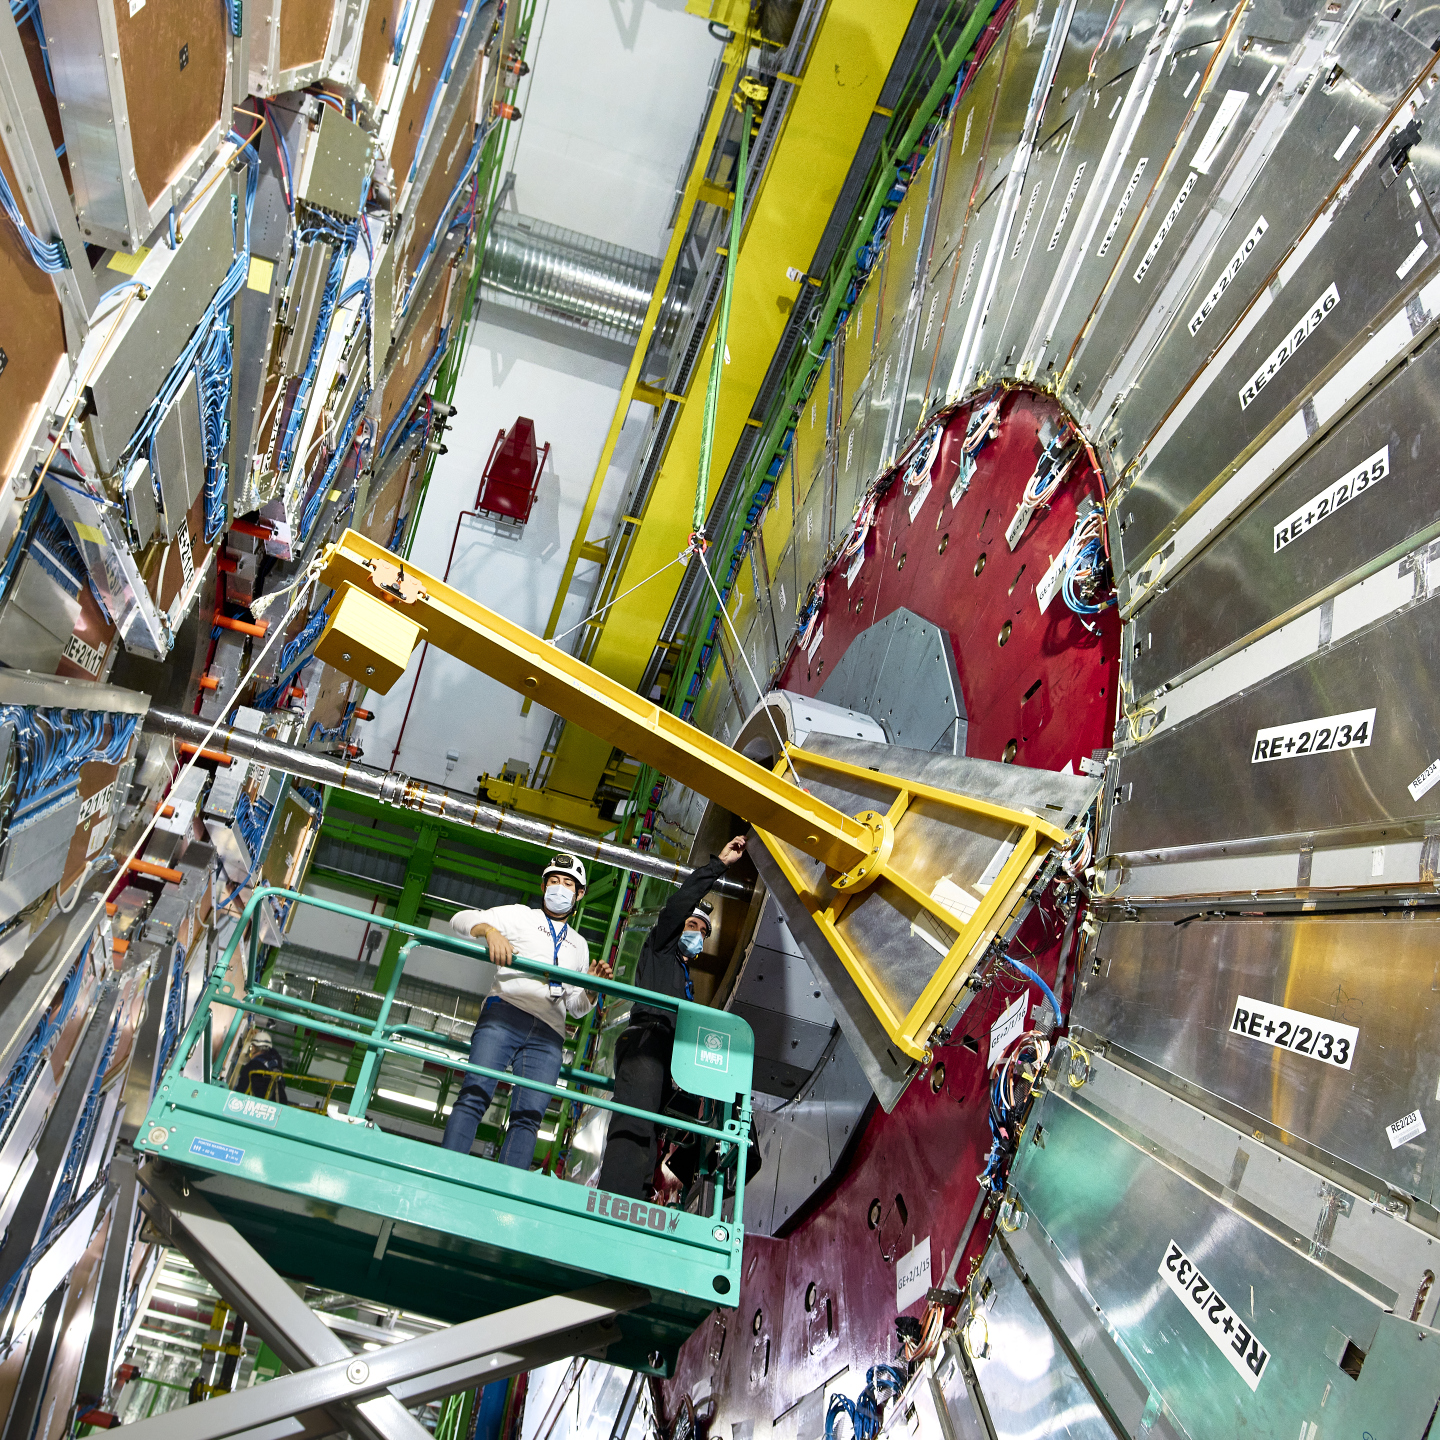 GE2/1 demonstrator being maneuvered into place on the CMS experiment